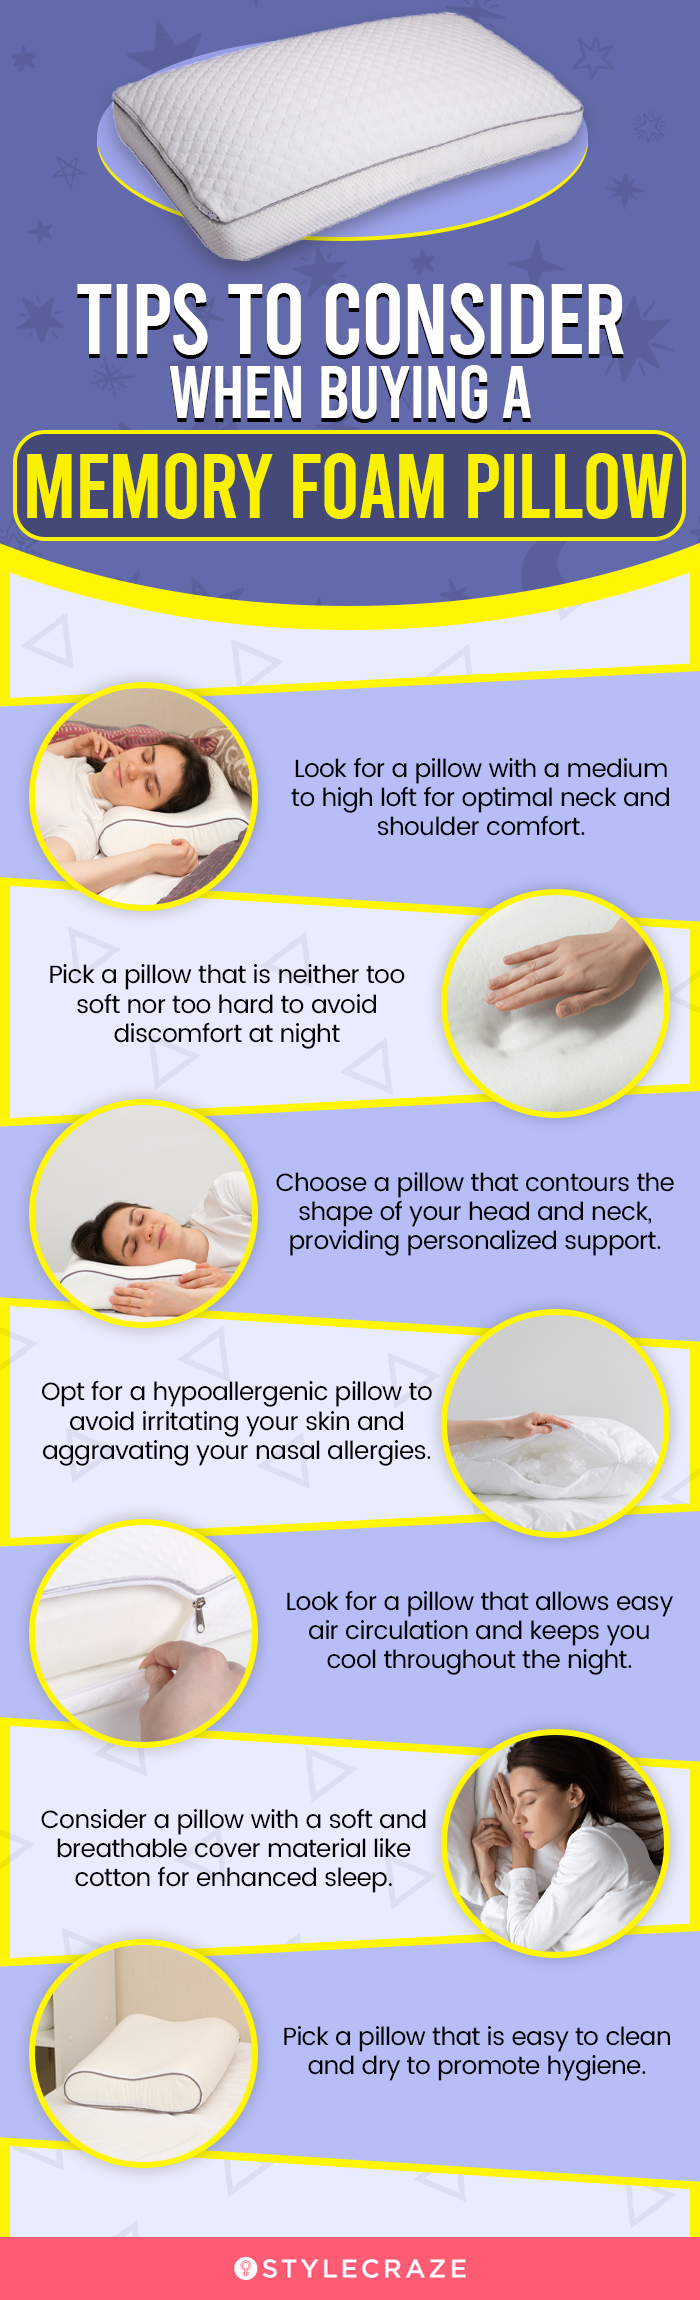 Tips To Consider When Buying A Memory Foam Pillow (infographic)